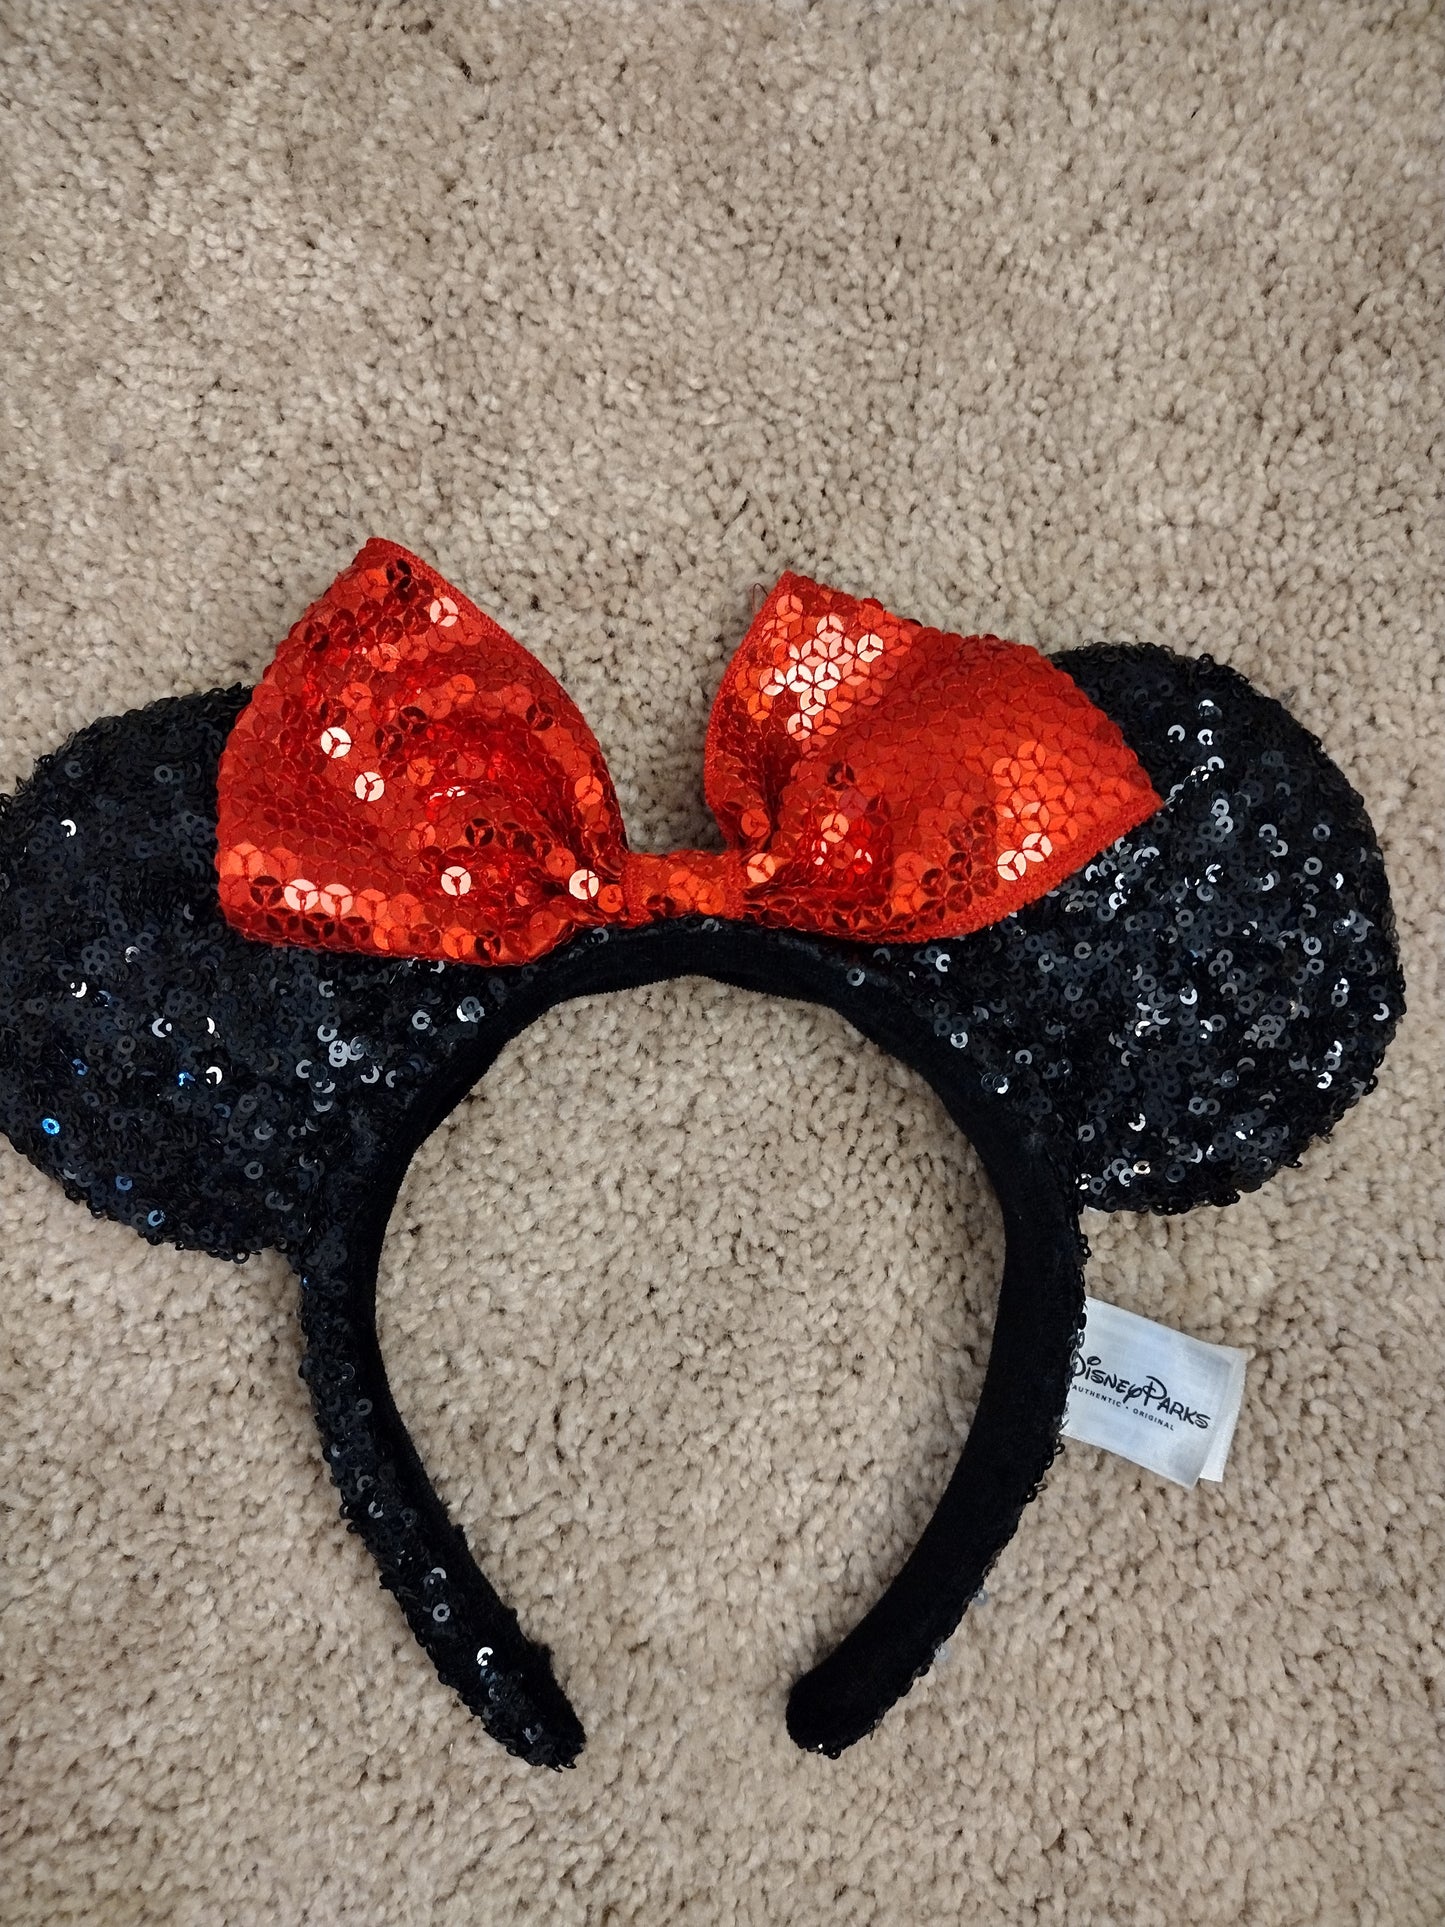 Disney Parks Miaow Sequin Black Minnie Mouse Ears - Black & Red - Glitter Hair Clasp